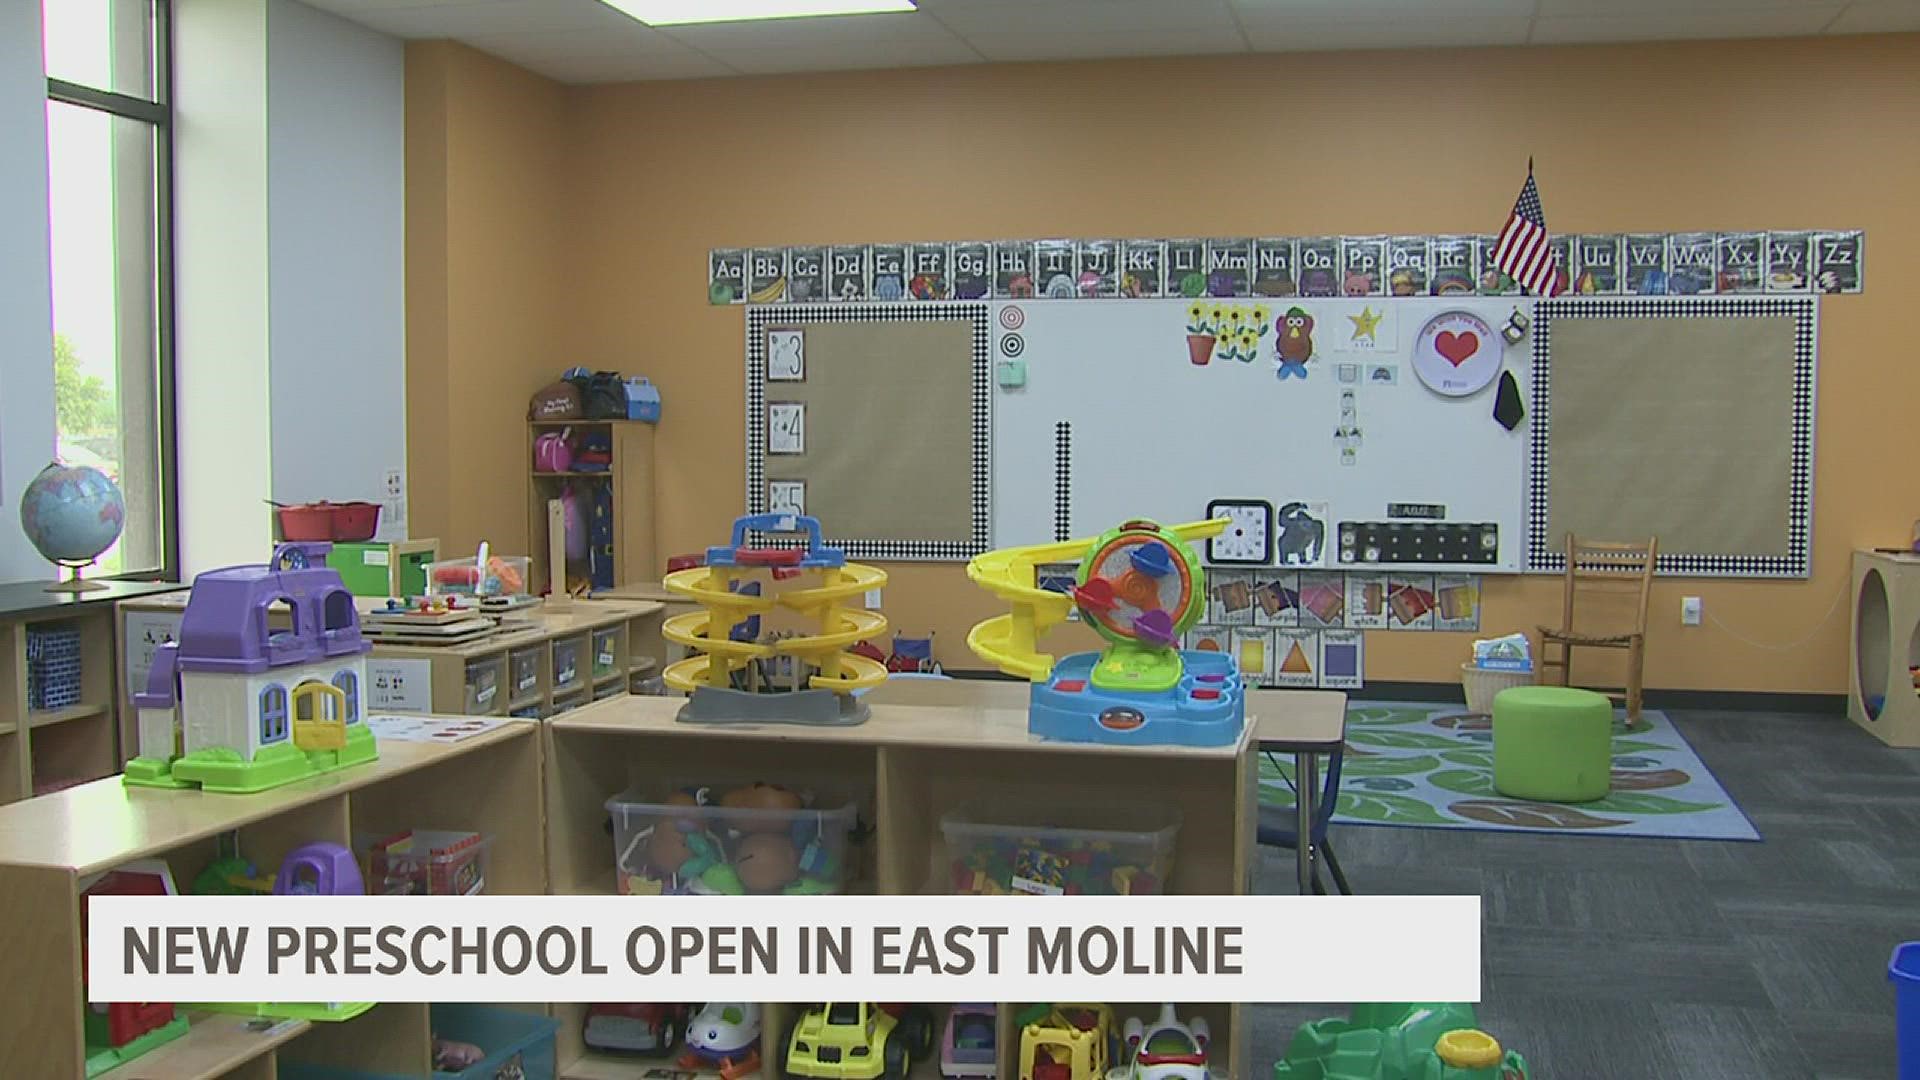 The East Moline Early Learning Center aims to give at-risk preschoolers a fun, interactive, and inclusive learning environment.